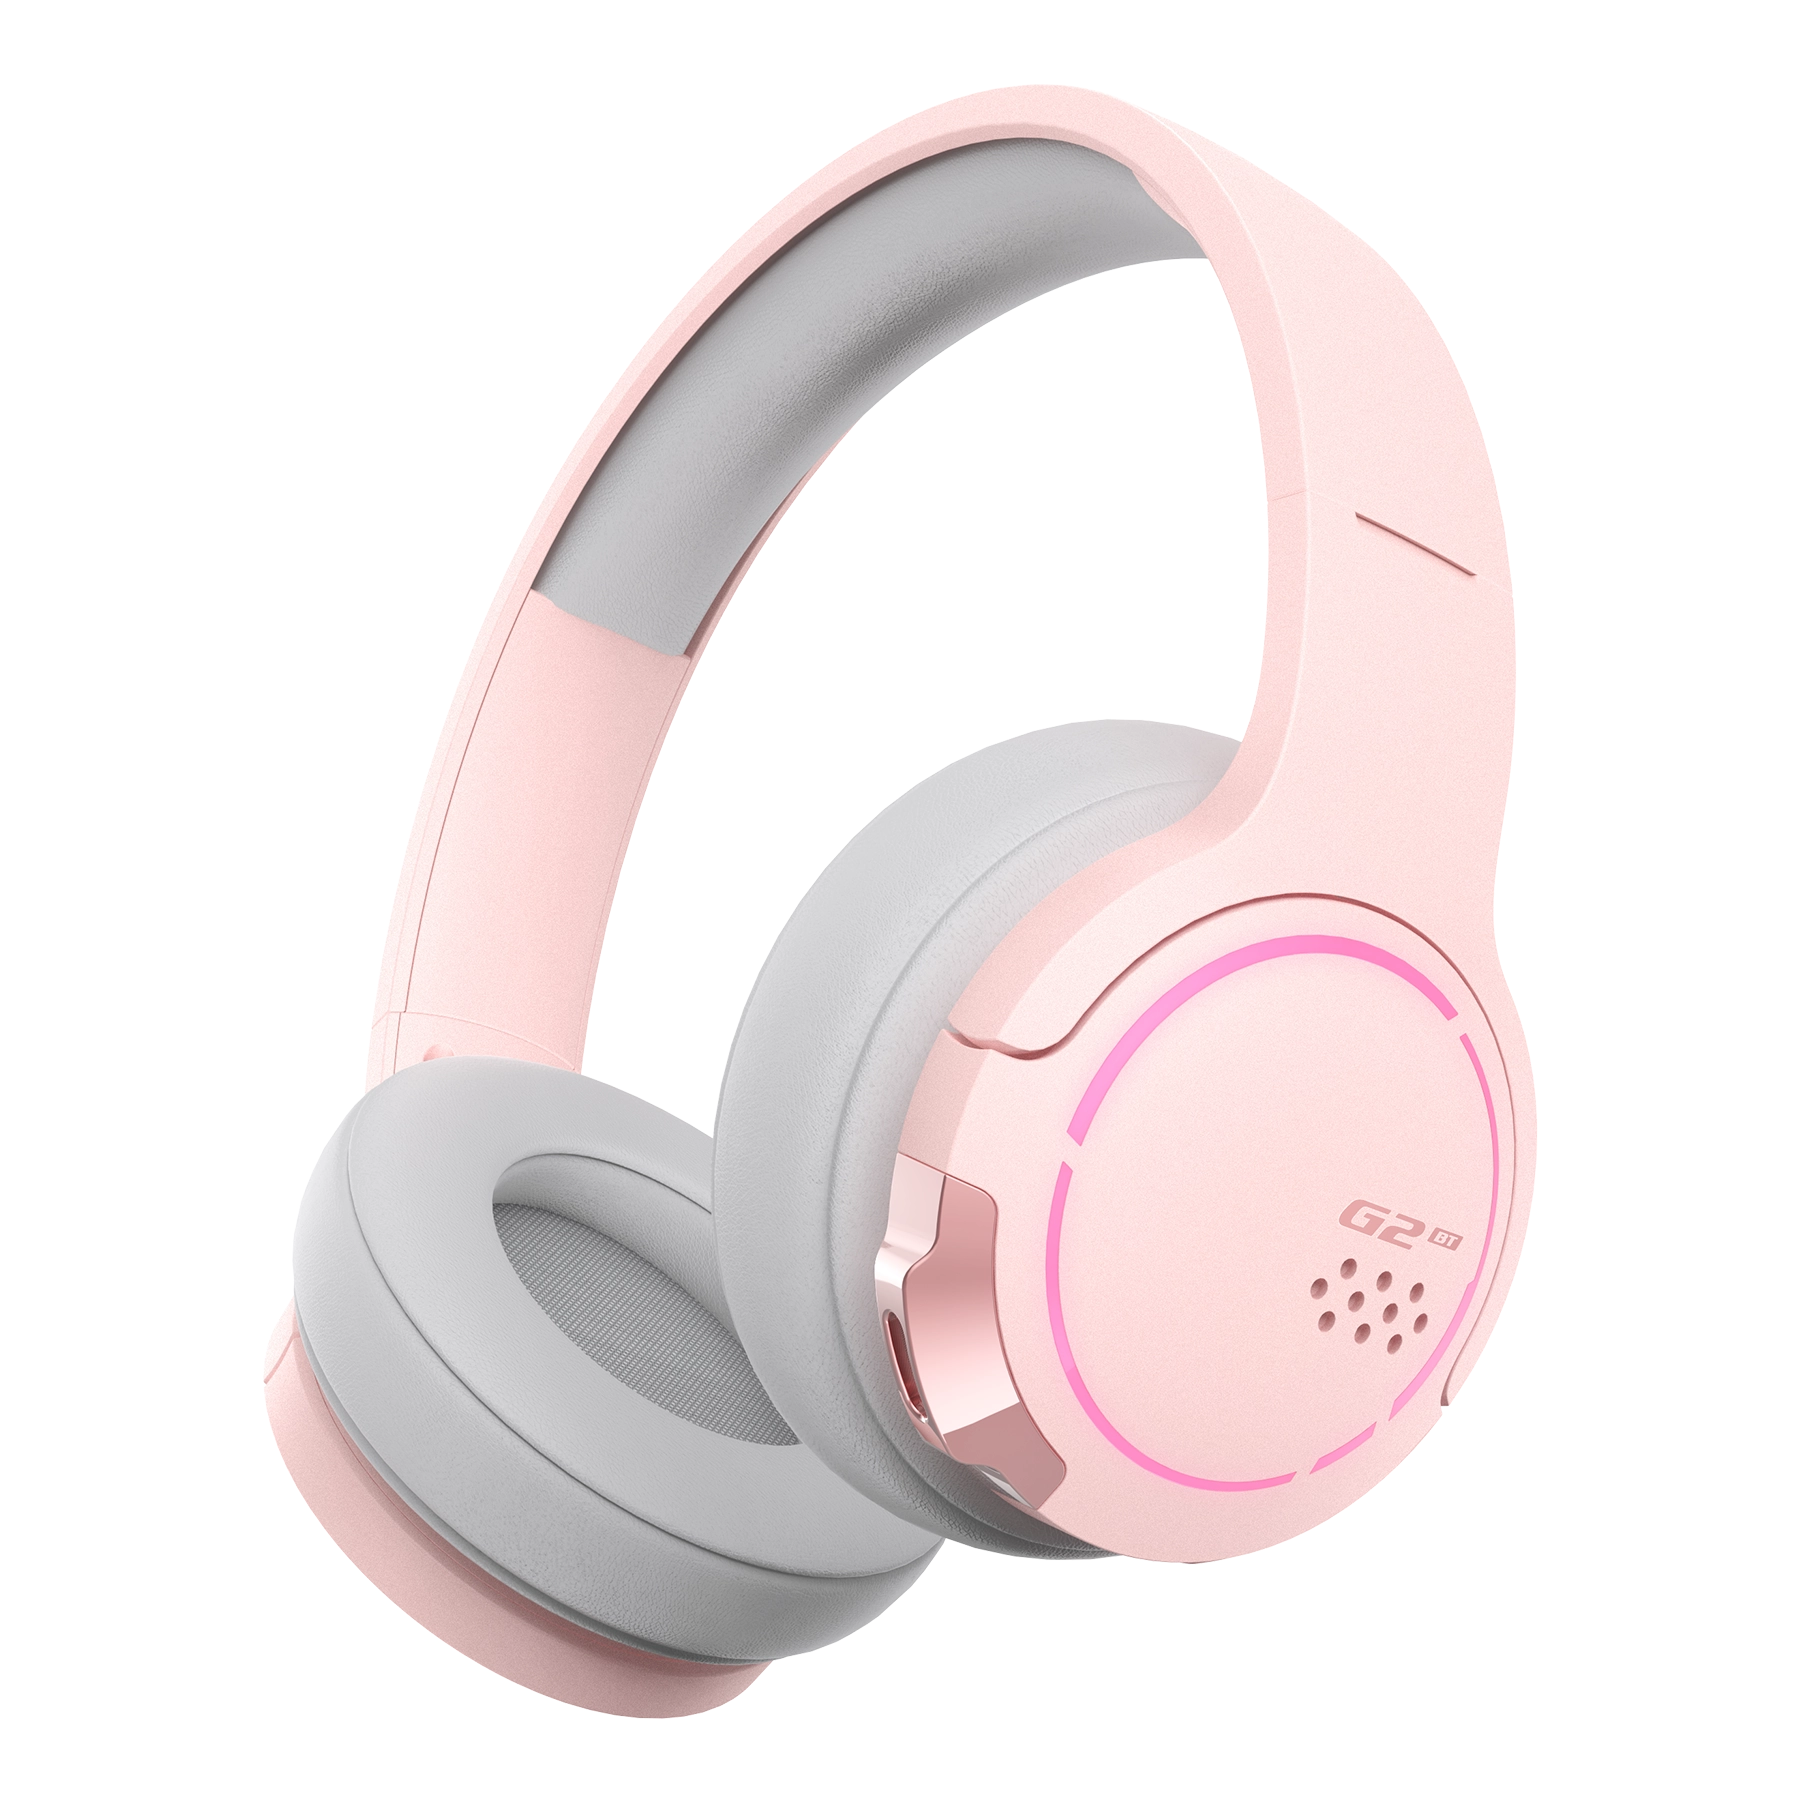 G2BT Headset Product pictures pink_1